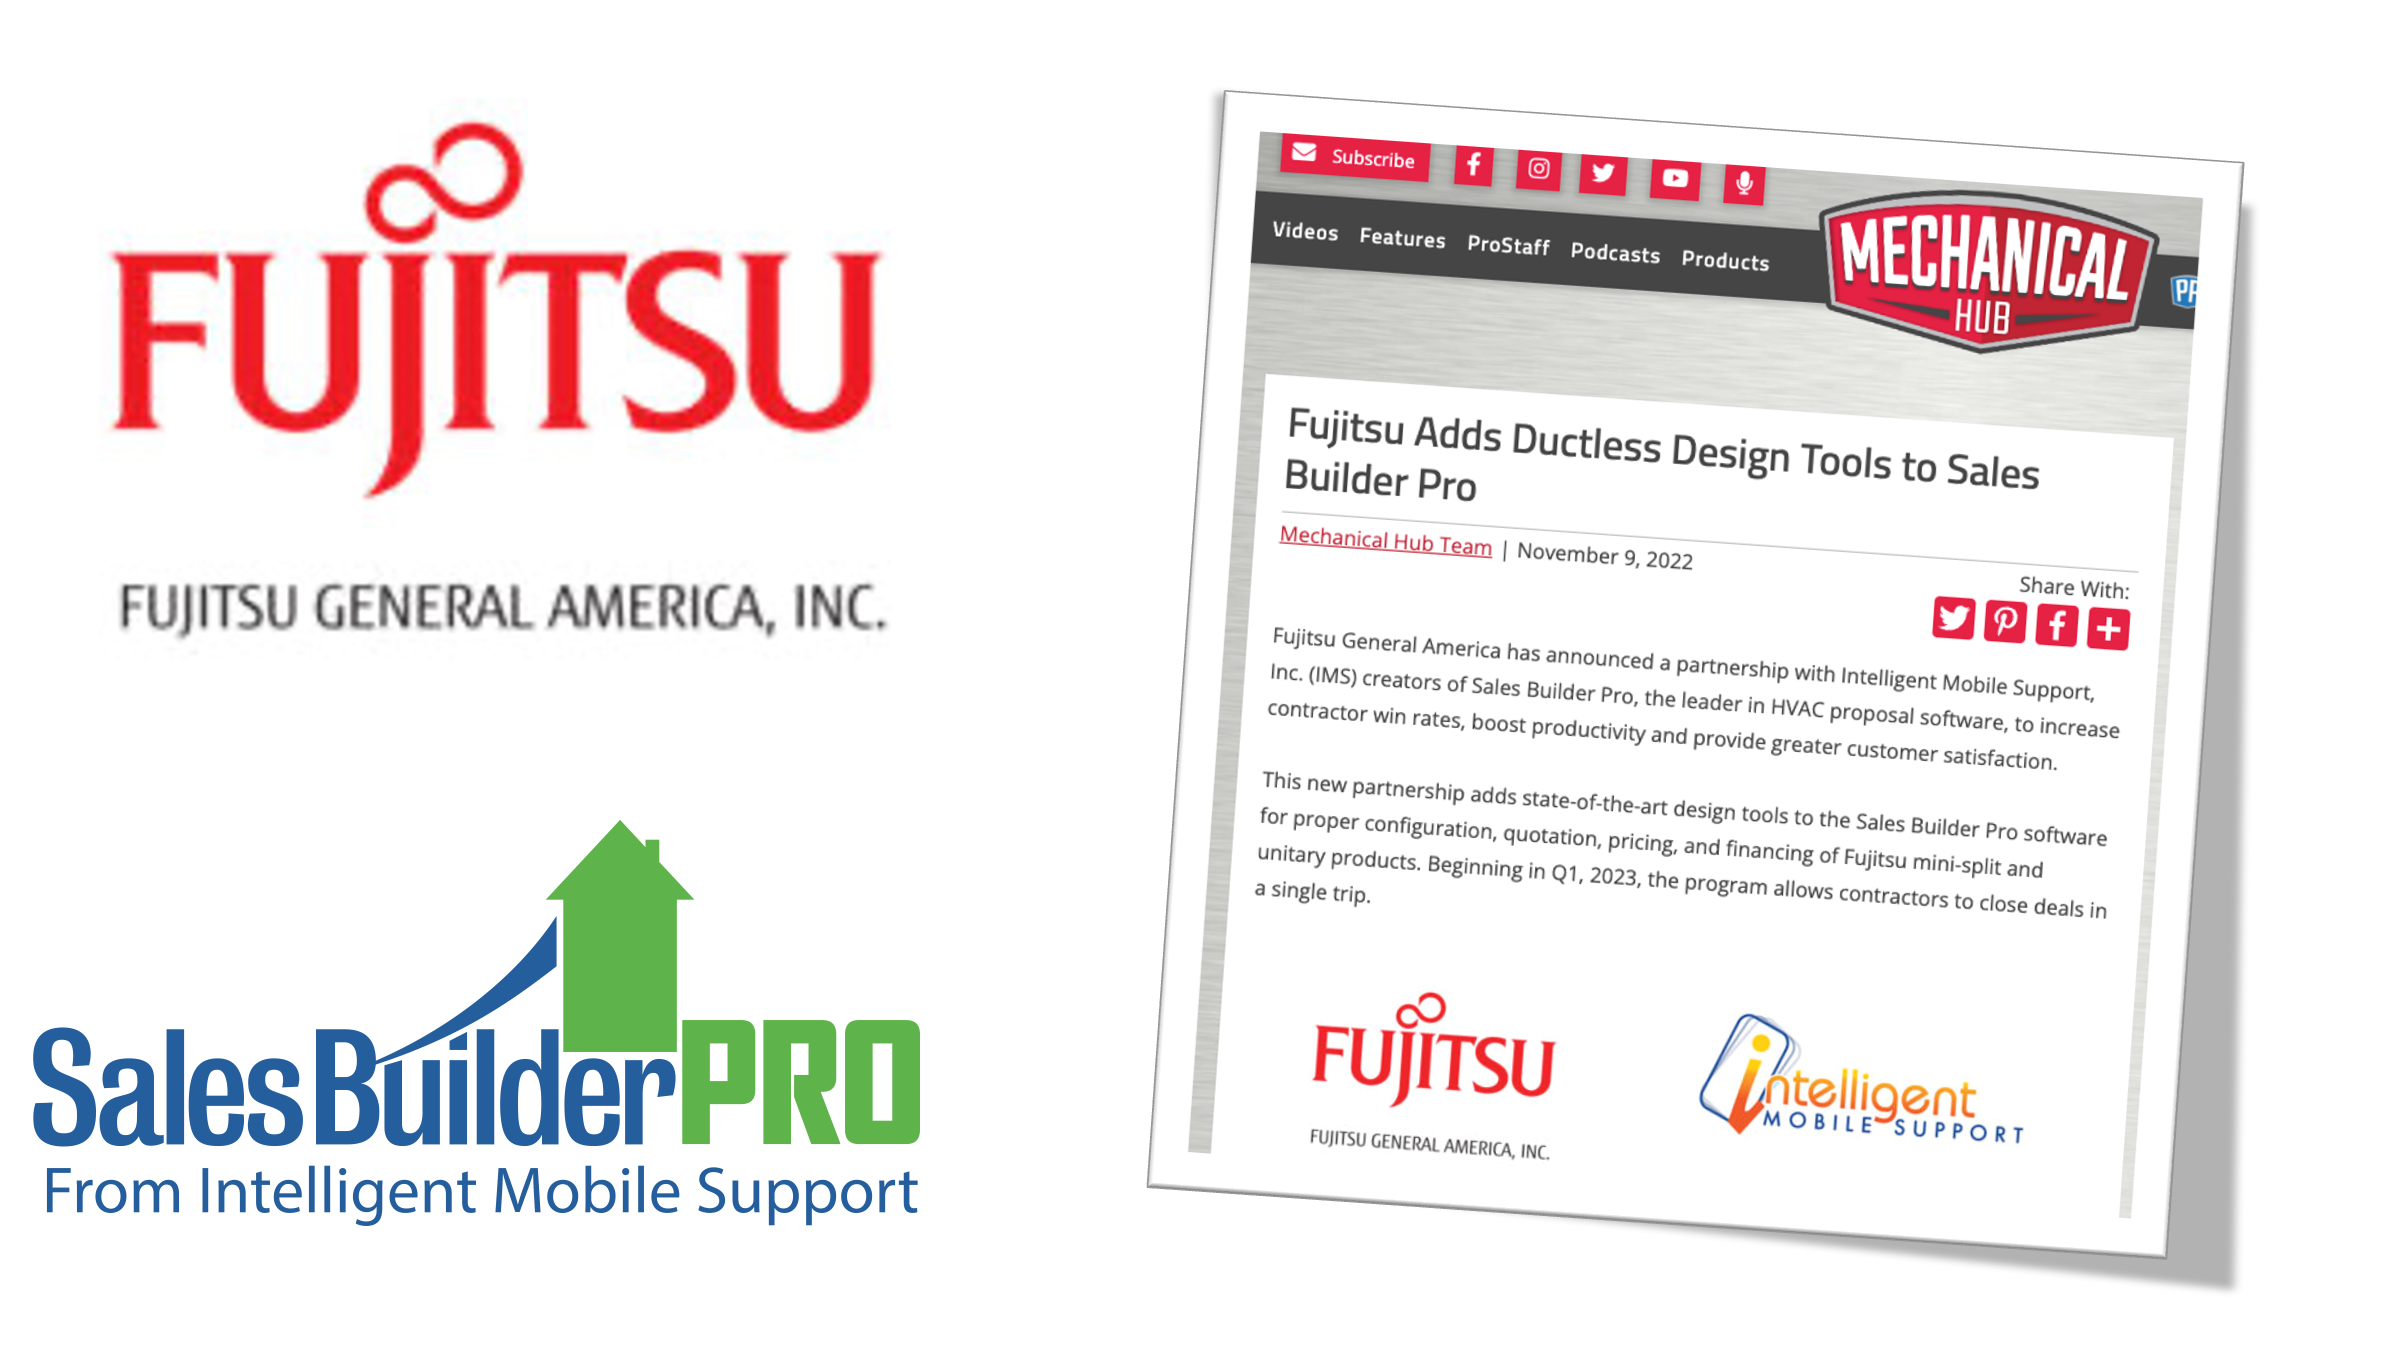 Fujitsu ductless on Sales Builder Pro